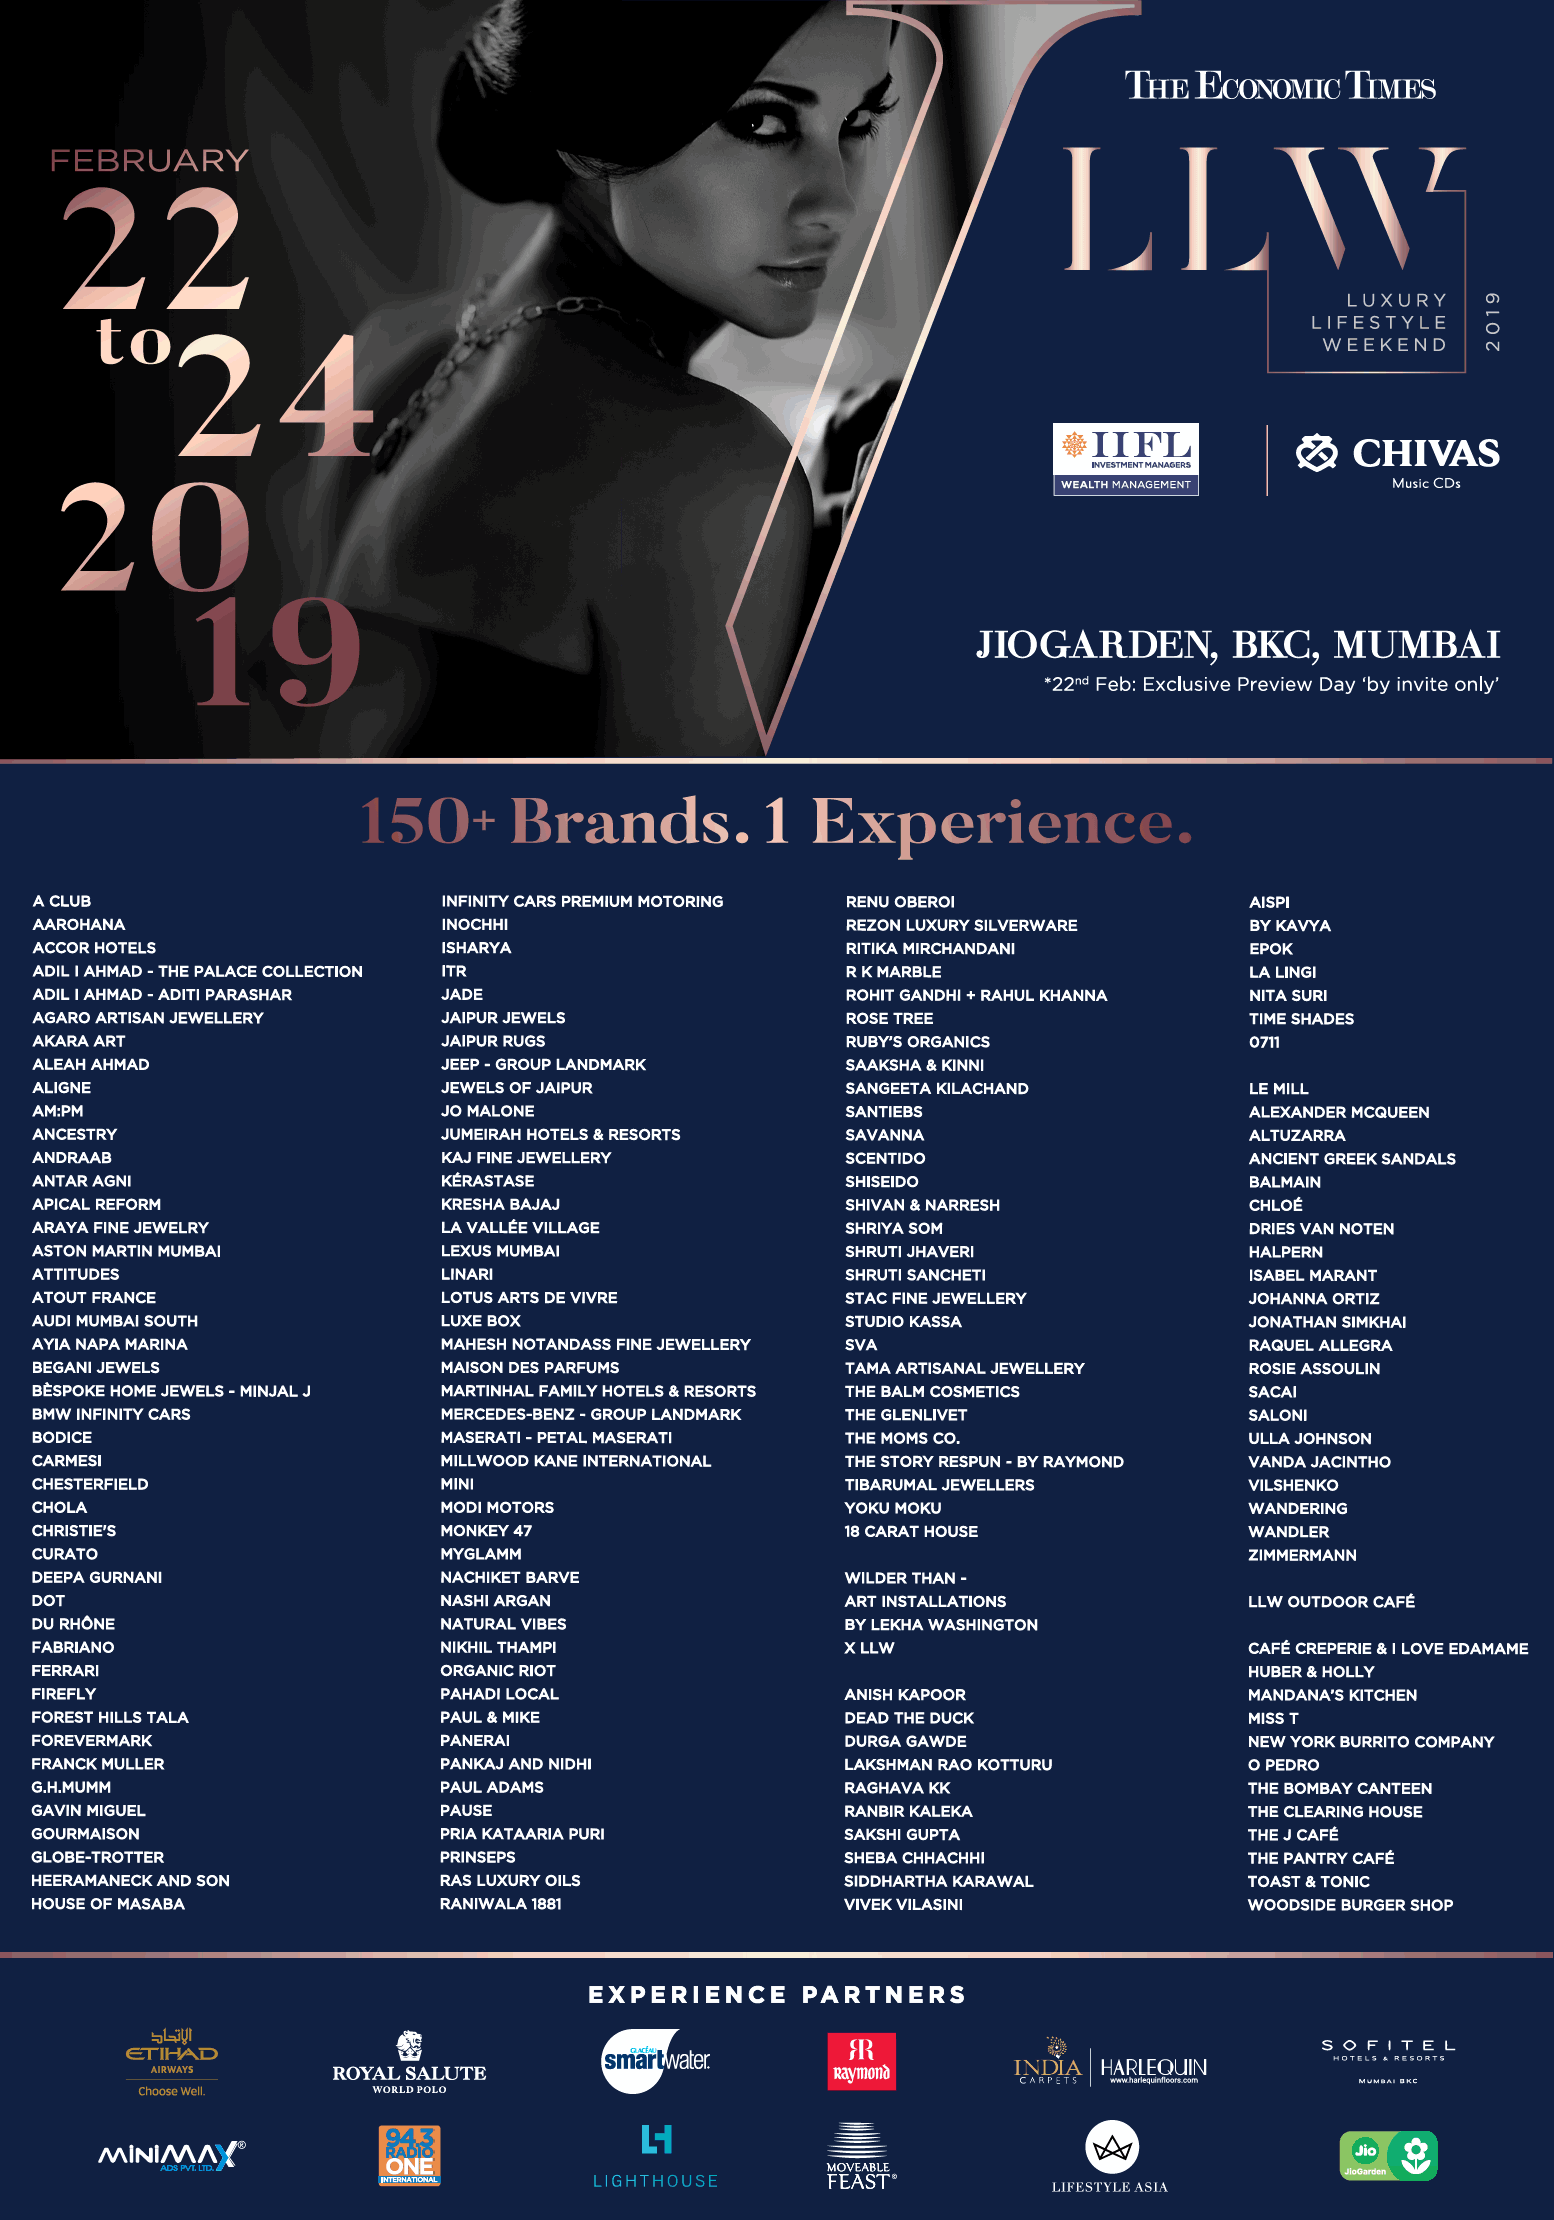 luxury-lifestyle-weekend-from-february-22-to-24-2019-ad-bombay-times-22-02-2019.png